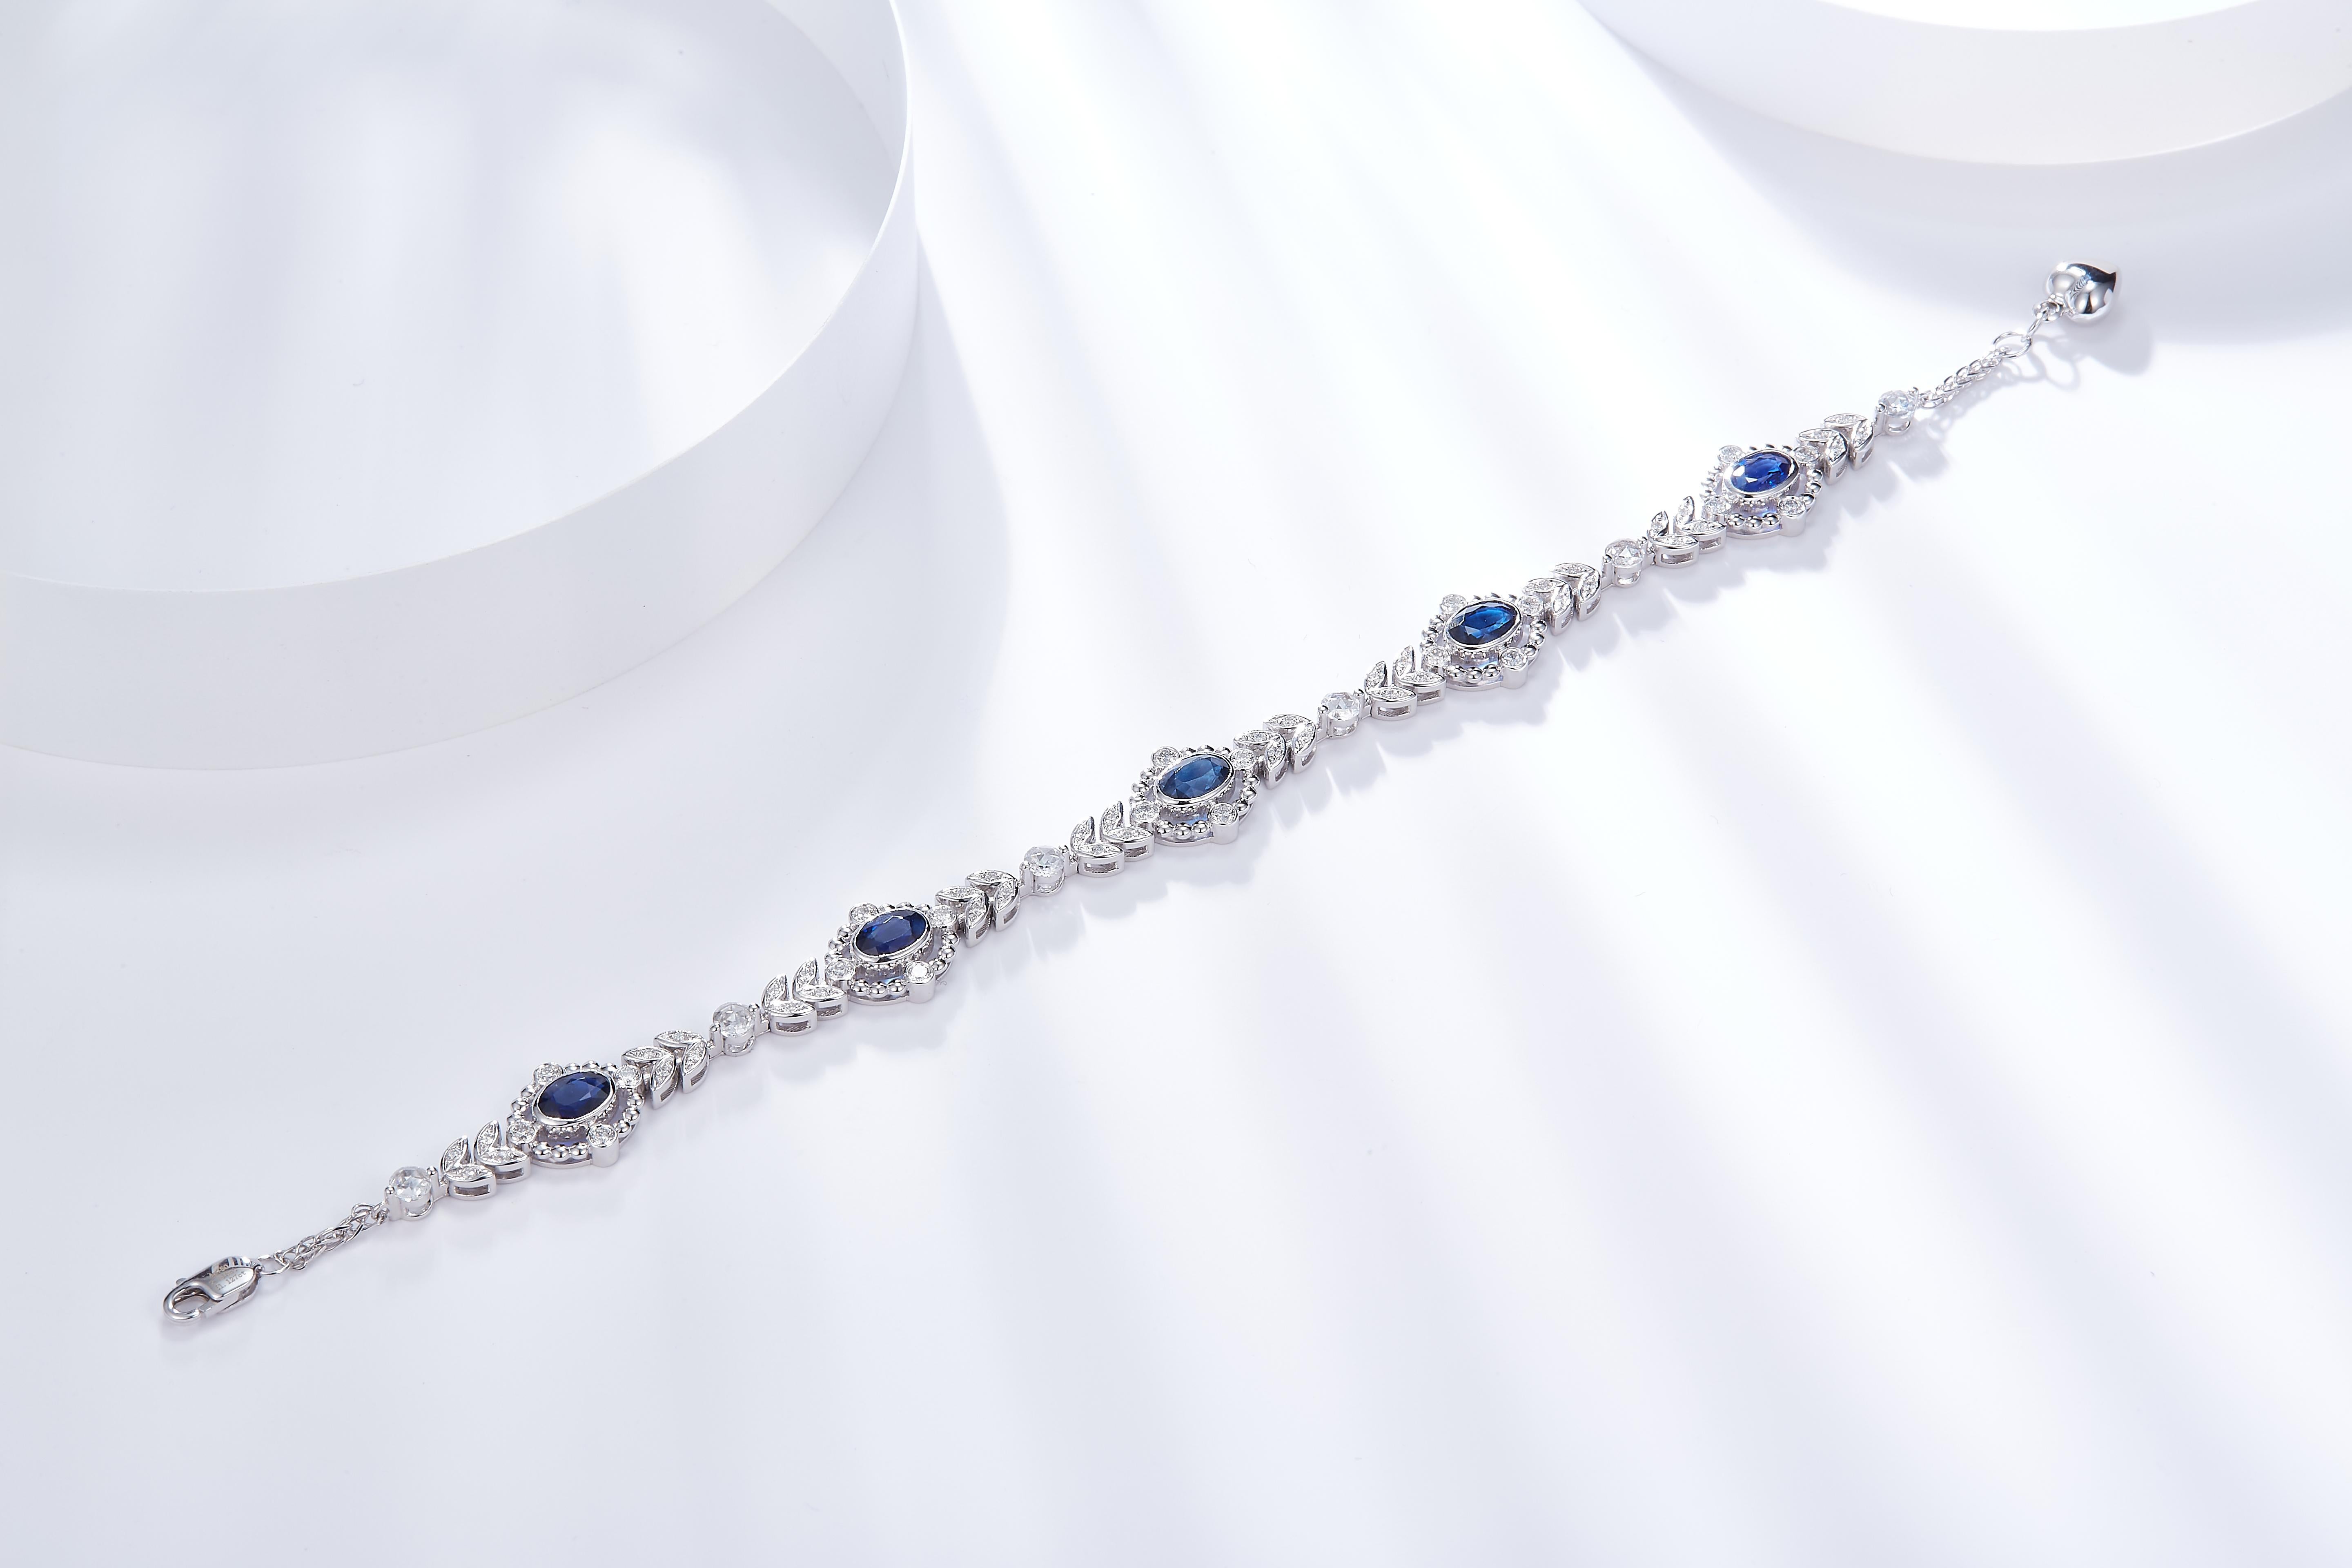 This is an Edwardian style bracelet. It is featuring 5 oval shape Royal Blue Colour Sapphires, each Sapphire is surrounded by a circle of Diamonds. It is then branch out with leaf-motif, further connected by a single Round Diamond. It is a very